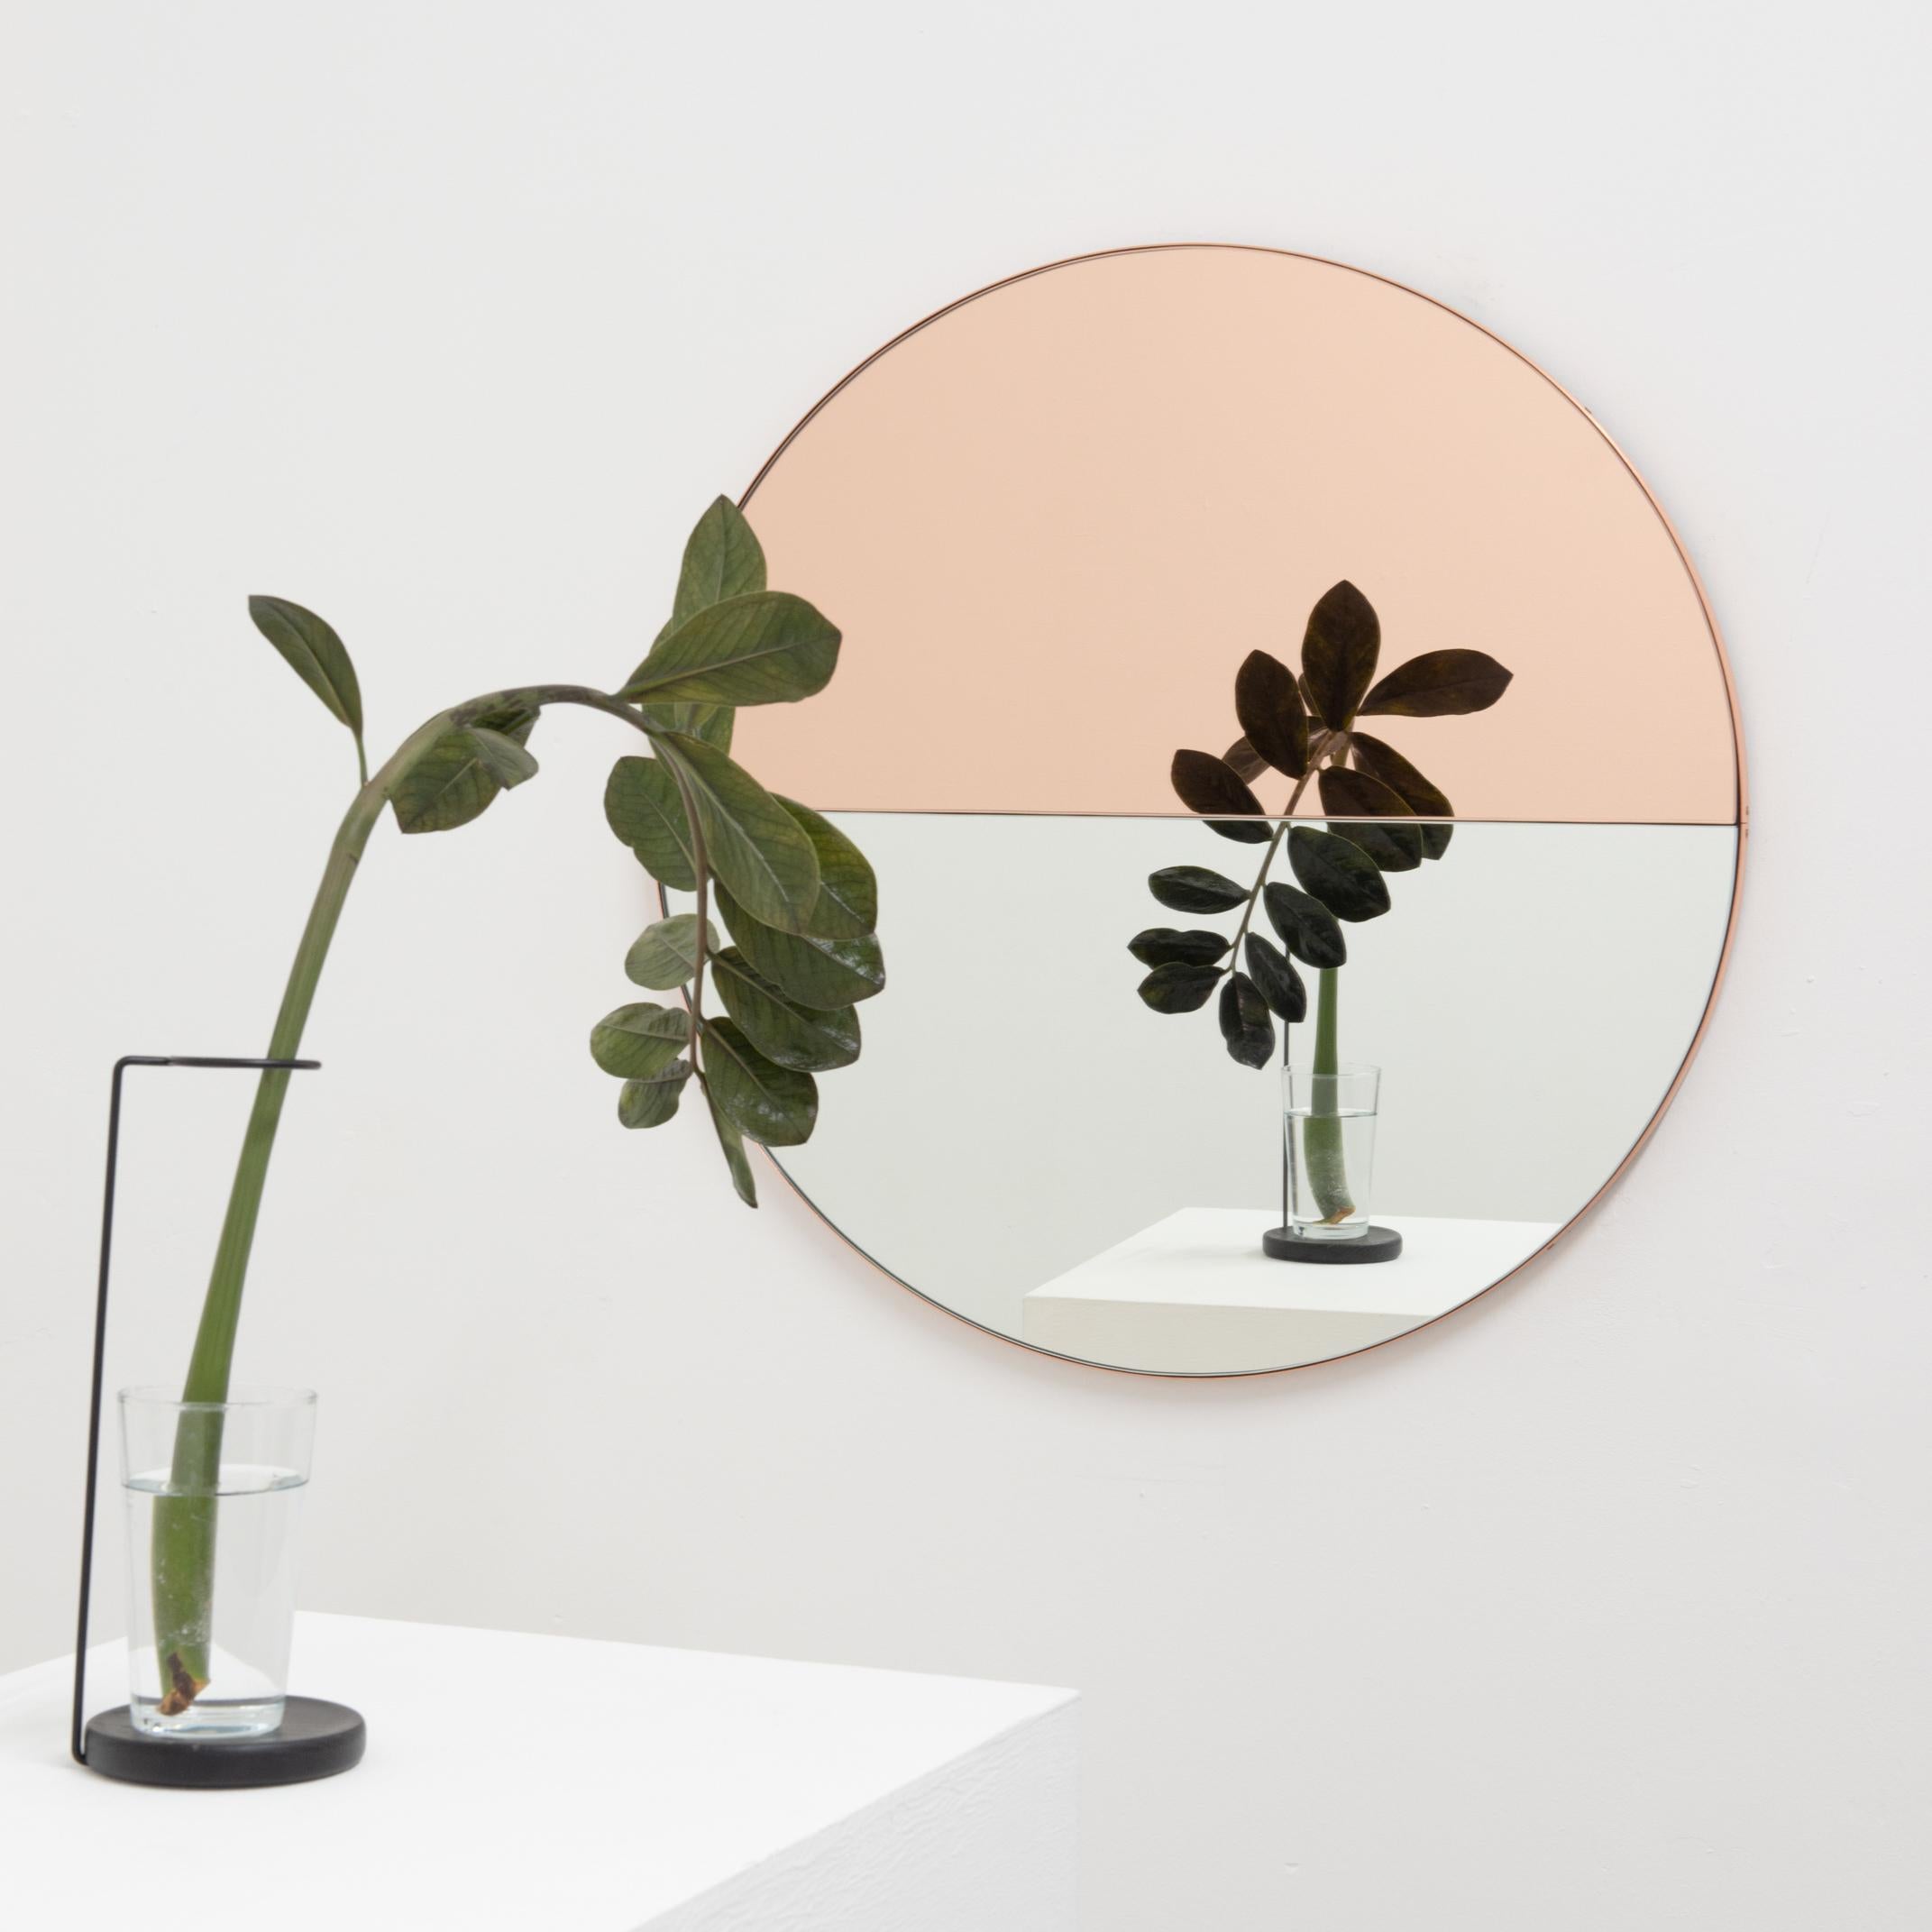 Orbis Dualis Mixed Rose Gold Tint Contemporary Round Mirror, Copper Frame, Small In New Condition For Sale In London, GB